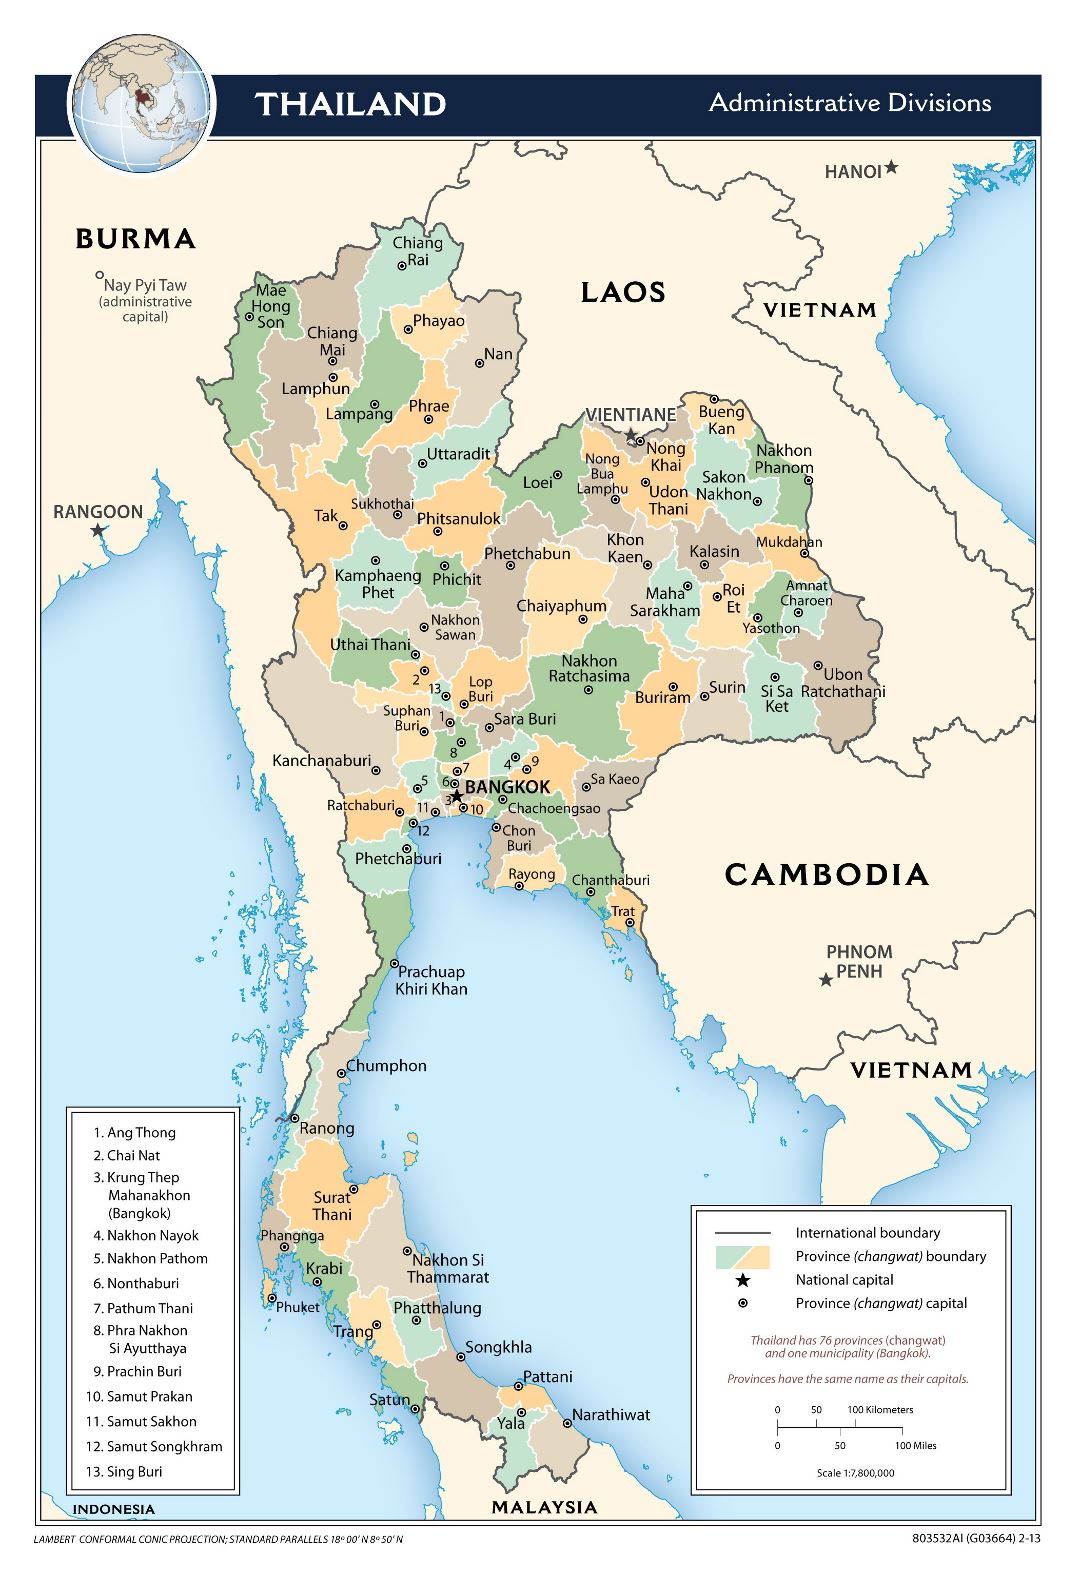 Large administrative divisions map of Thailand - 2013